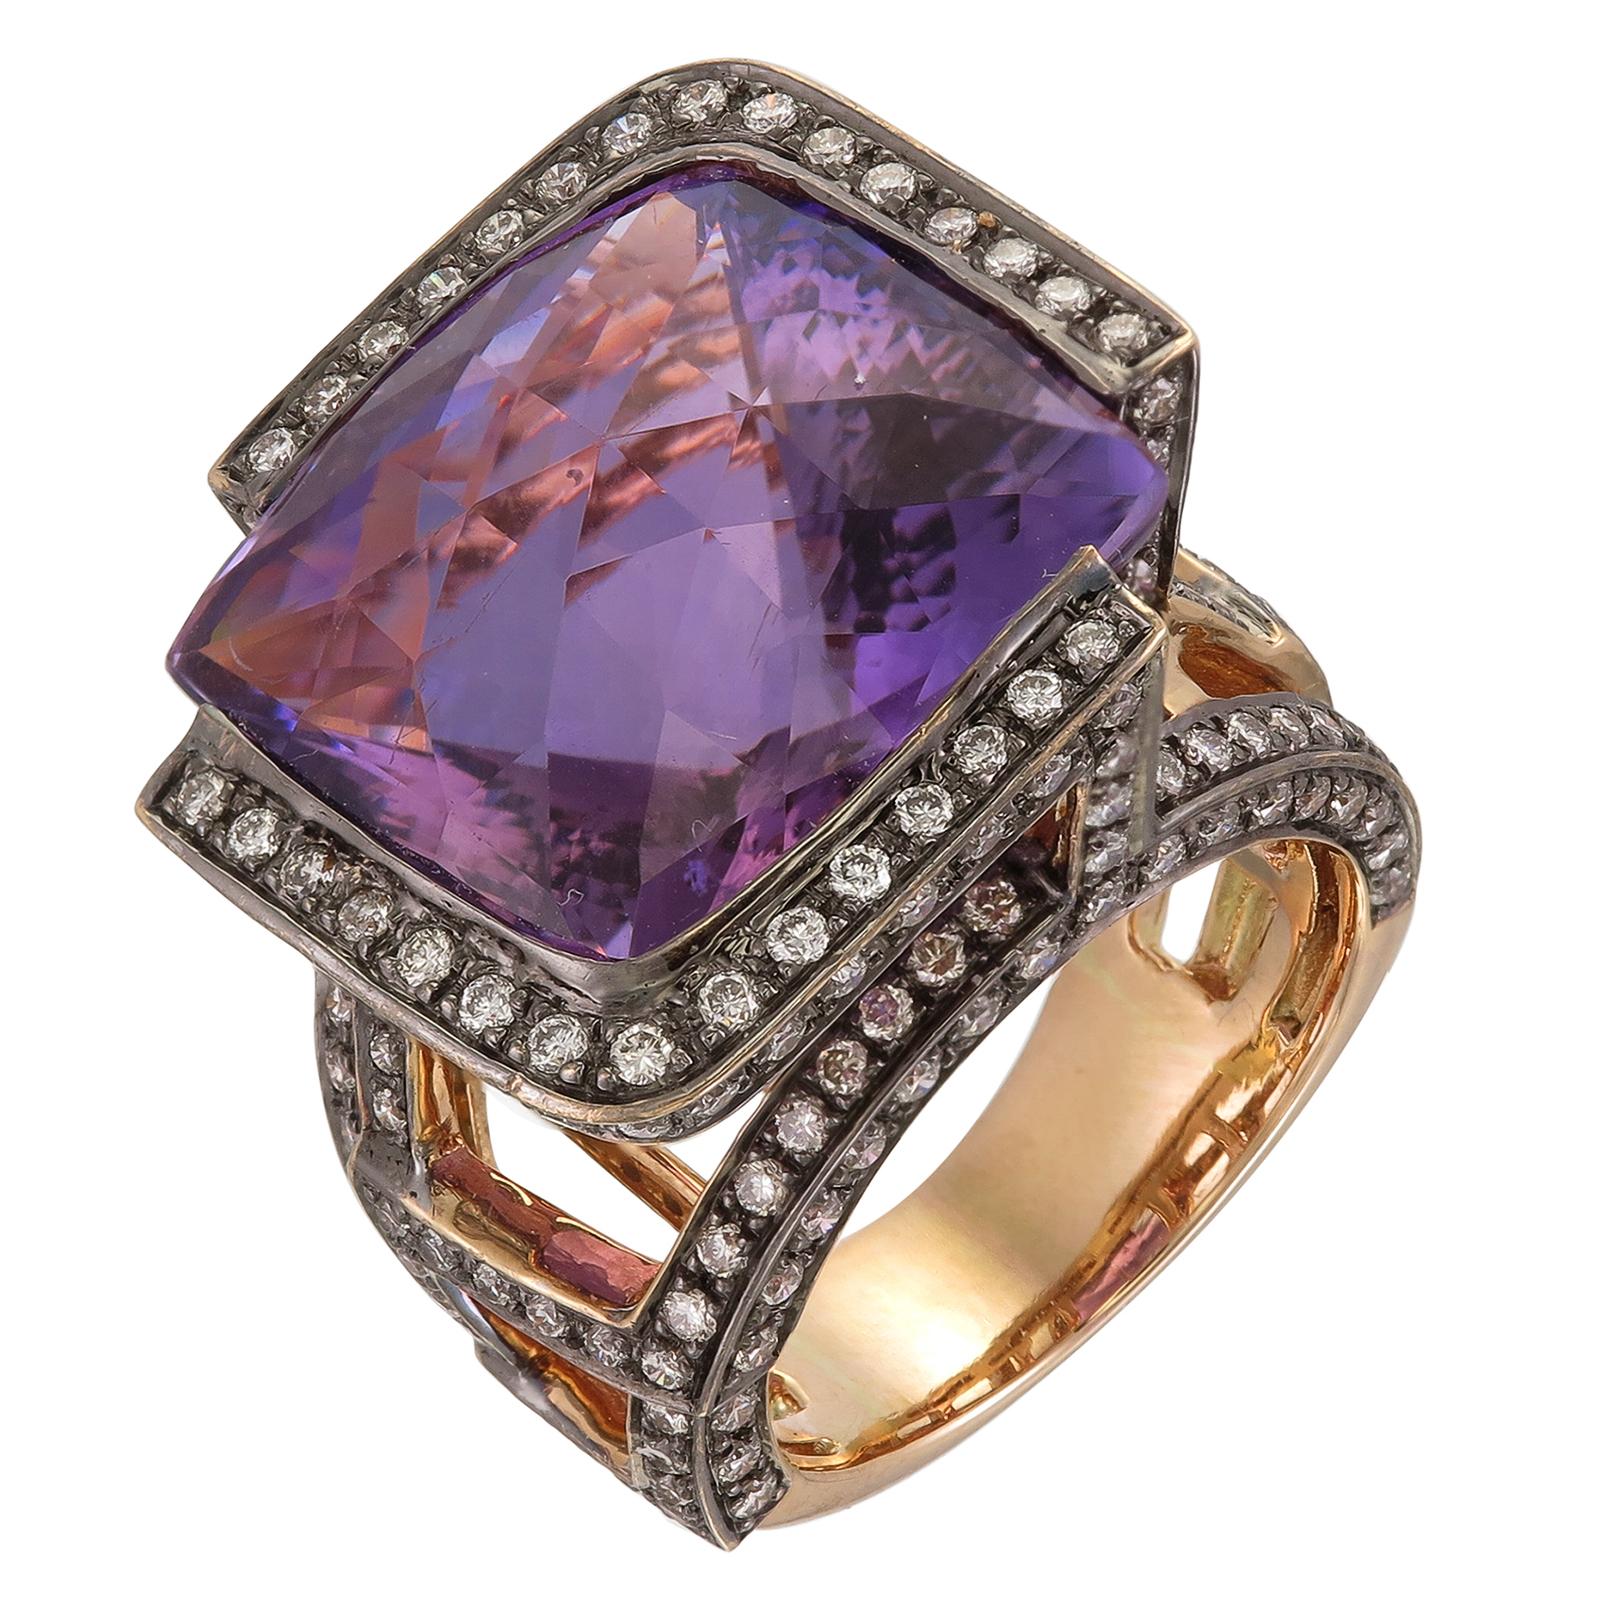 An exceptional 20.13-carat amethyst with a rare cut appears like rock star on an 18K ring with about 200 rounds diamonds. 

This ring, as with all Zorab Creation pieces, are sent with a unique serial number to validate its authenticity. 

Ring Size